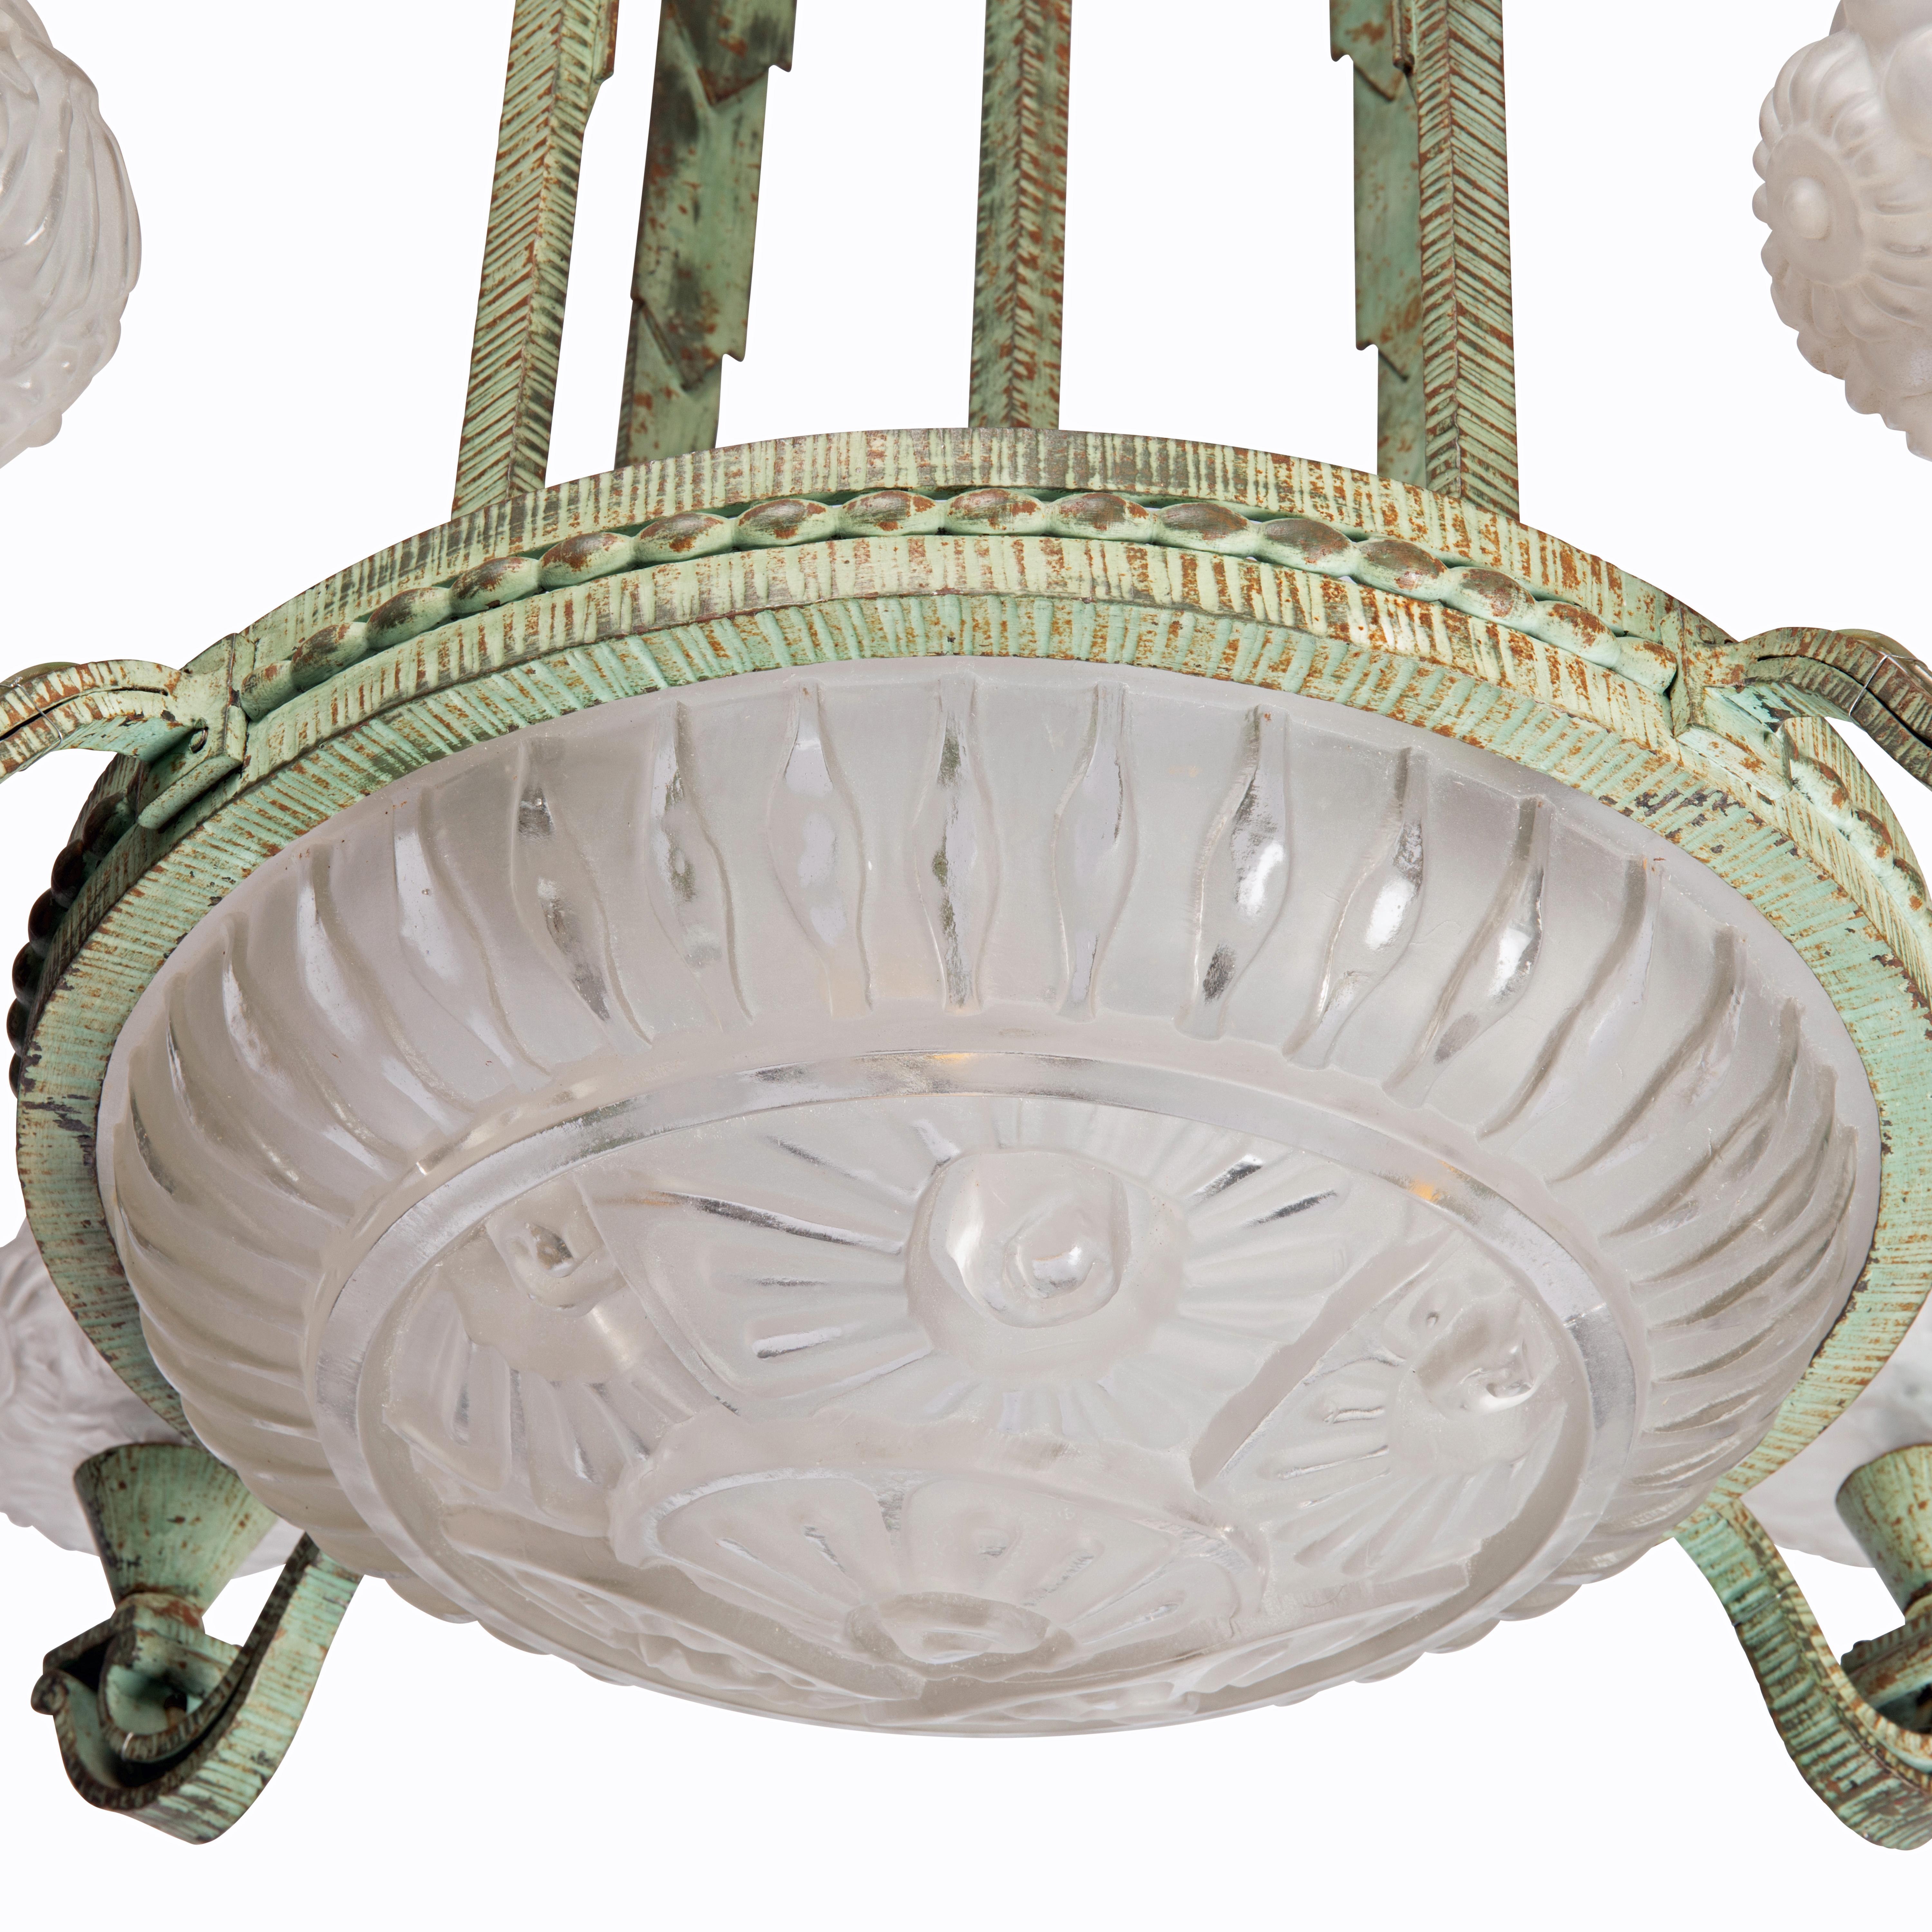 Beautiful Circular Art Deco chandelier, in Patinated Cast Iron attributed to Paul Kiss, and Pressed and Molded Glass by Genet & Michon.

The chandelier is in the shape of a skyscraper, or a cascading fountain and the wrought iron has the original